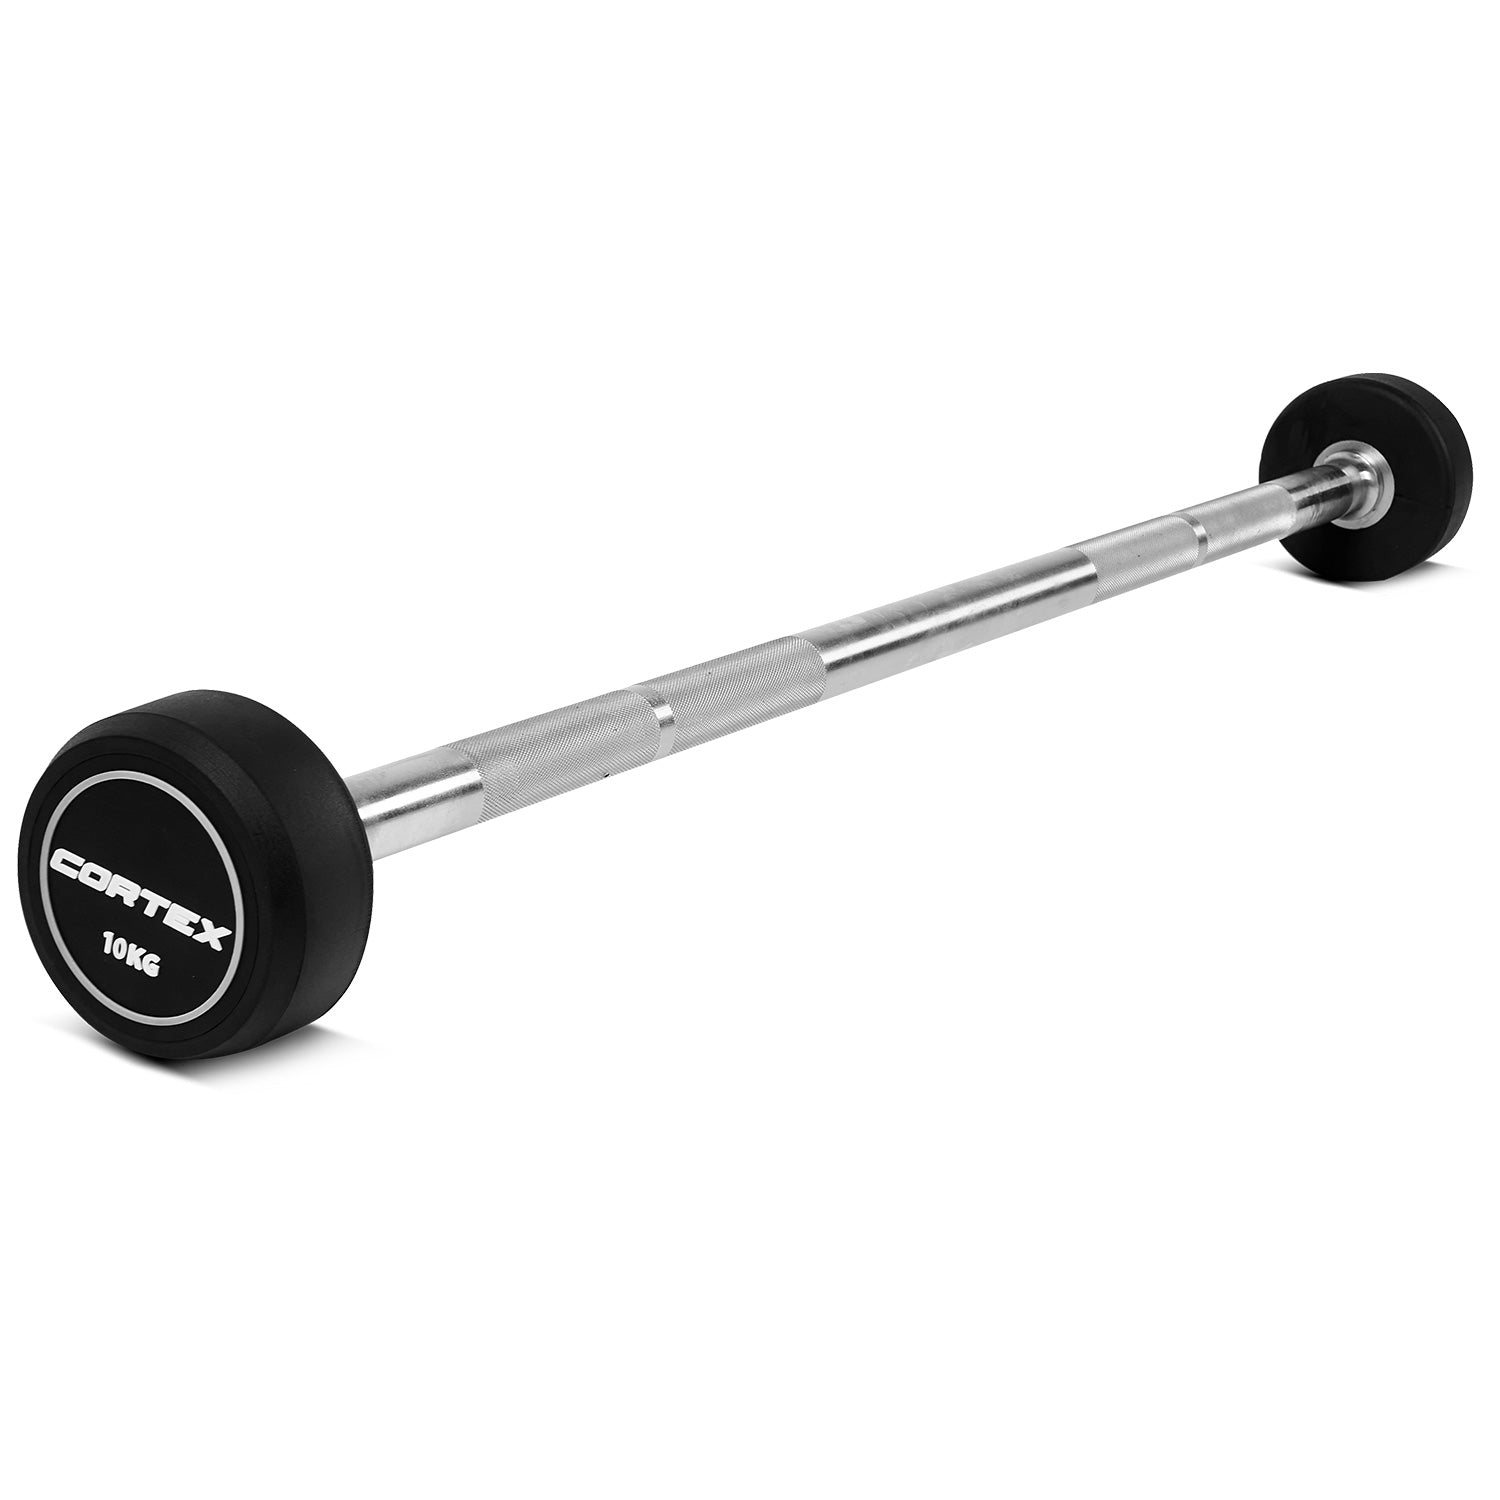 CORTEX 100kg ALPHA Series Fixed Barbell Set with Stand